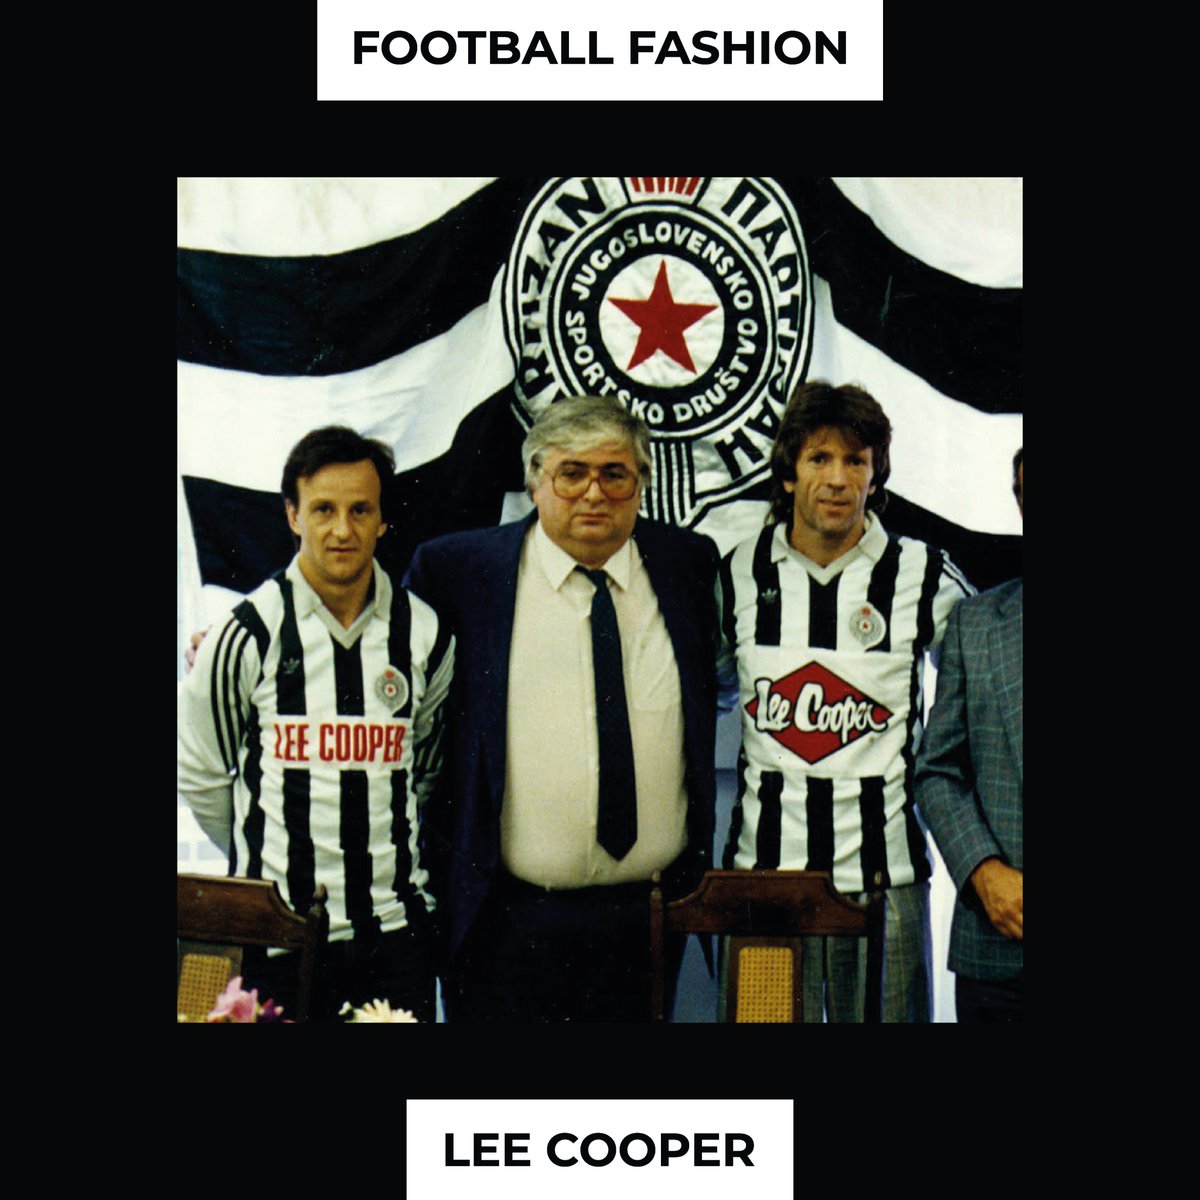 Football Fashion: FK Partizan and Lee CooperCan you think of any other fashion brands that have sponsored a football team?